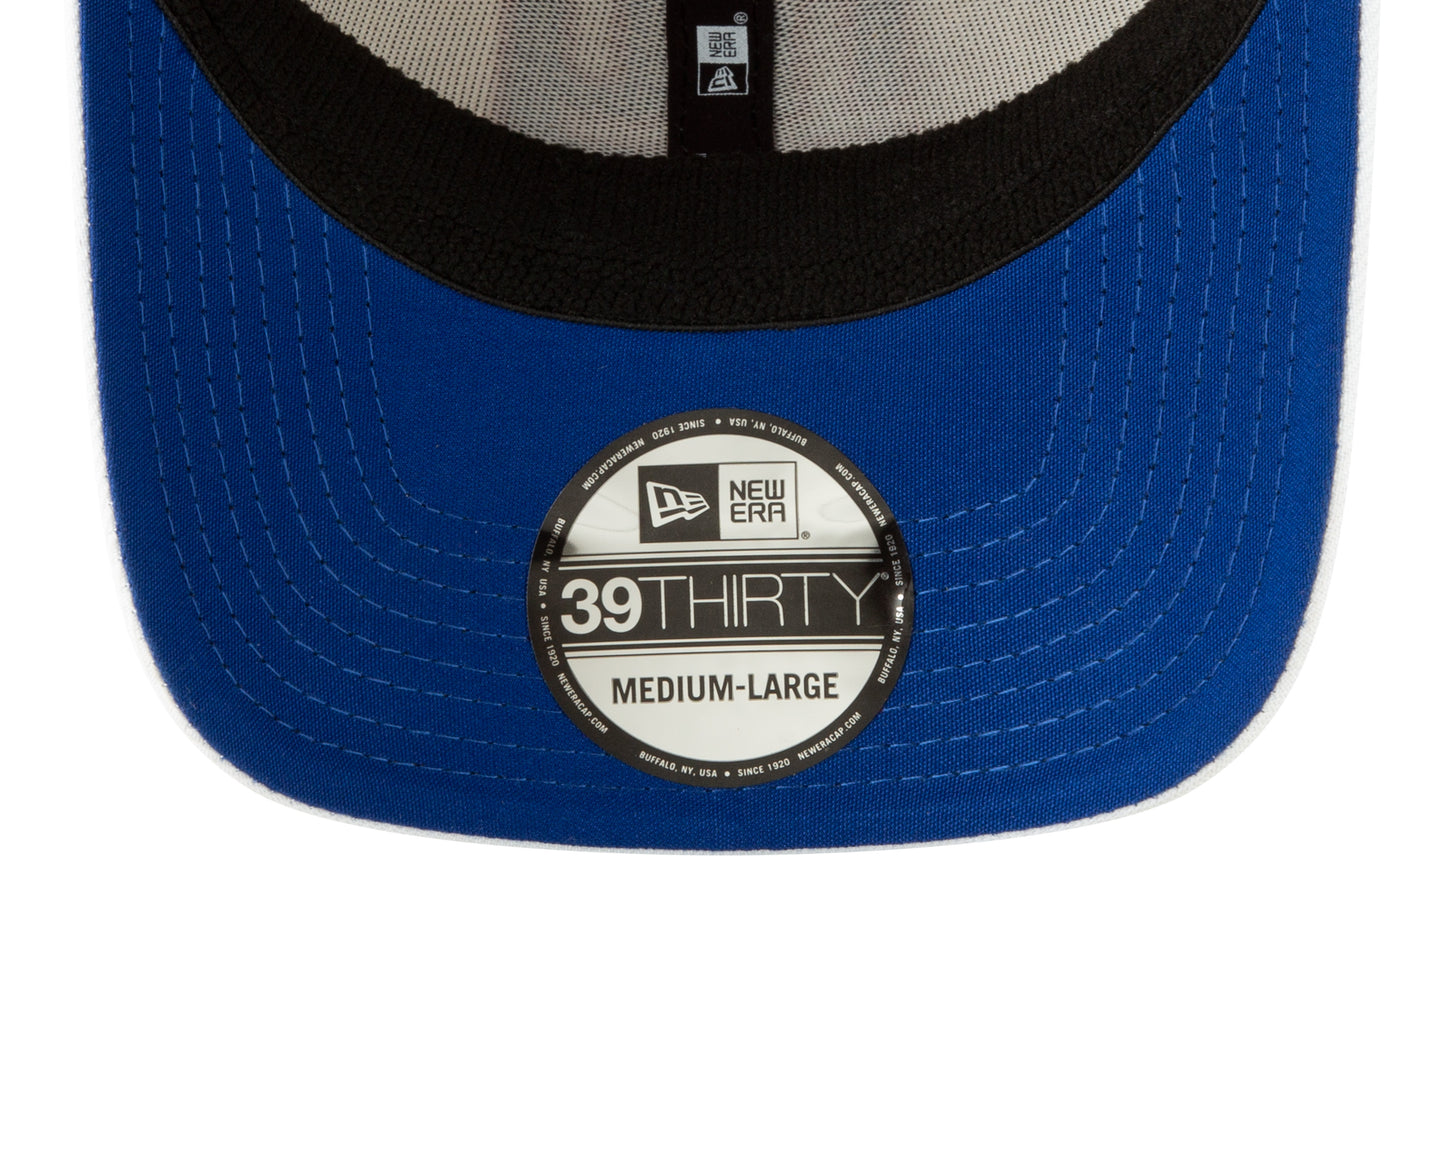 New York Giants New Era 2019 NFL Draft On-Stage Official 39THIRTY Flex Hat